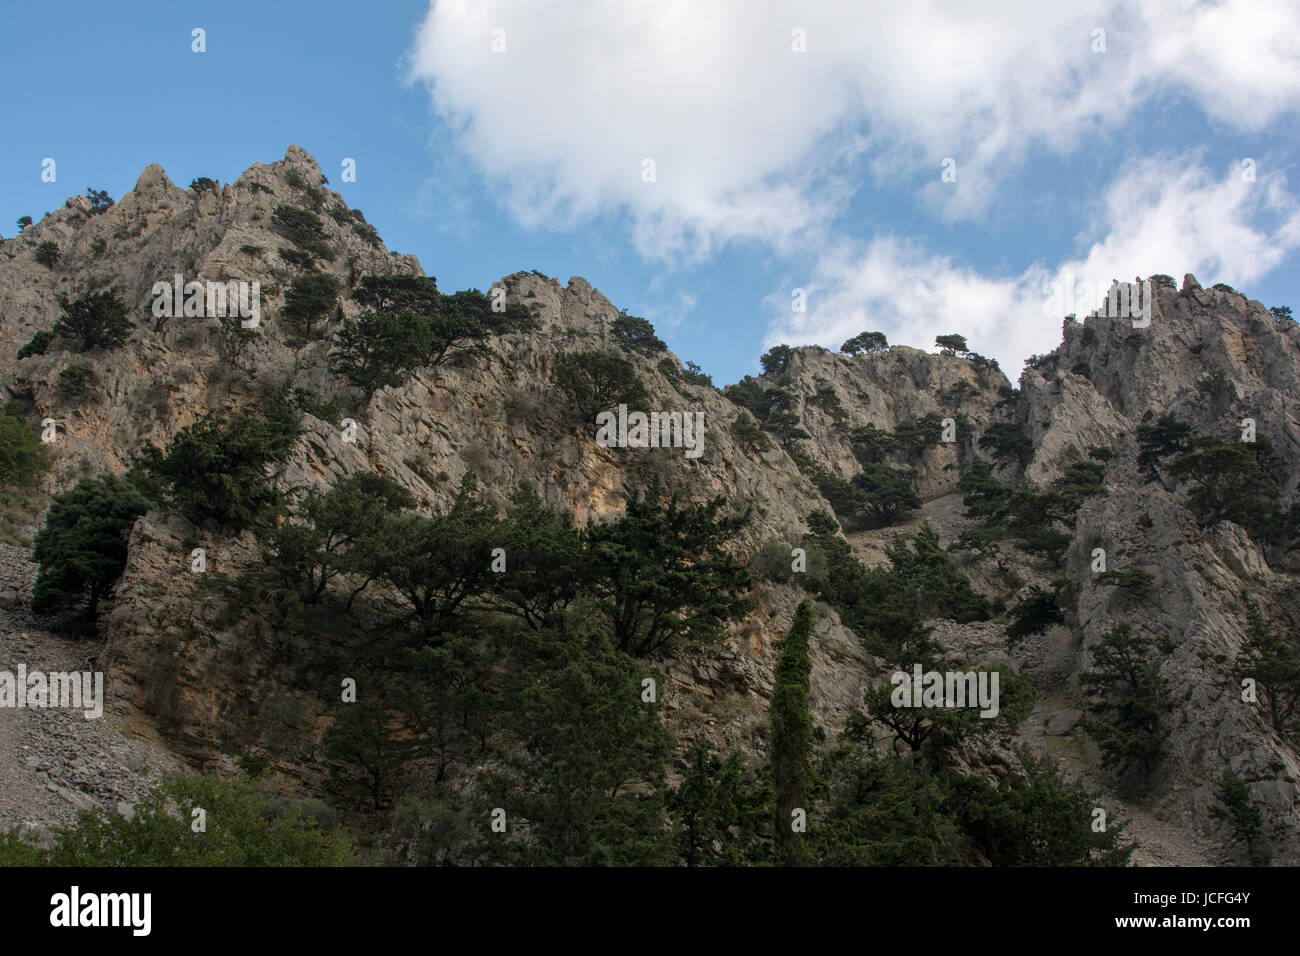 The Aleppo Pine is growing around the Mediterranean Coast as here in the Imbros Gorge at the southwest coast of Crete.  Die Aleppo-Kiefer wächst in vi Stock Photo